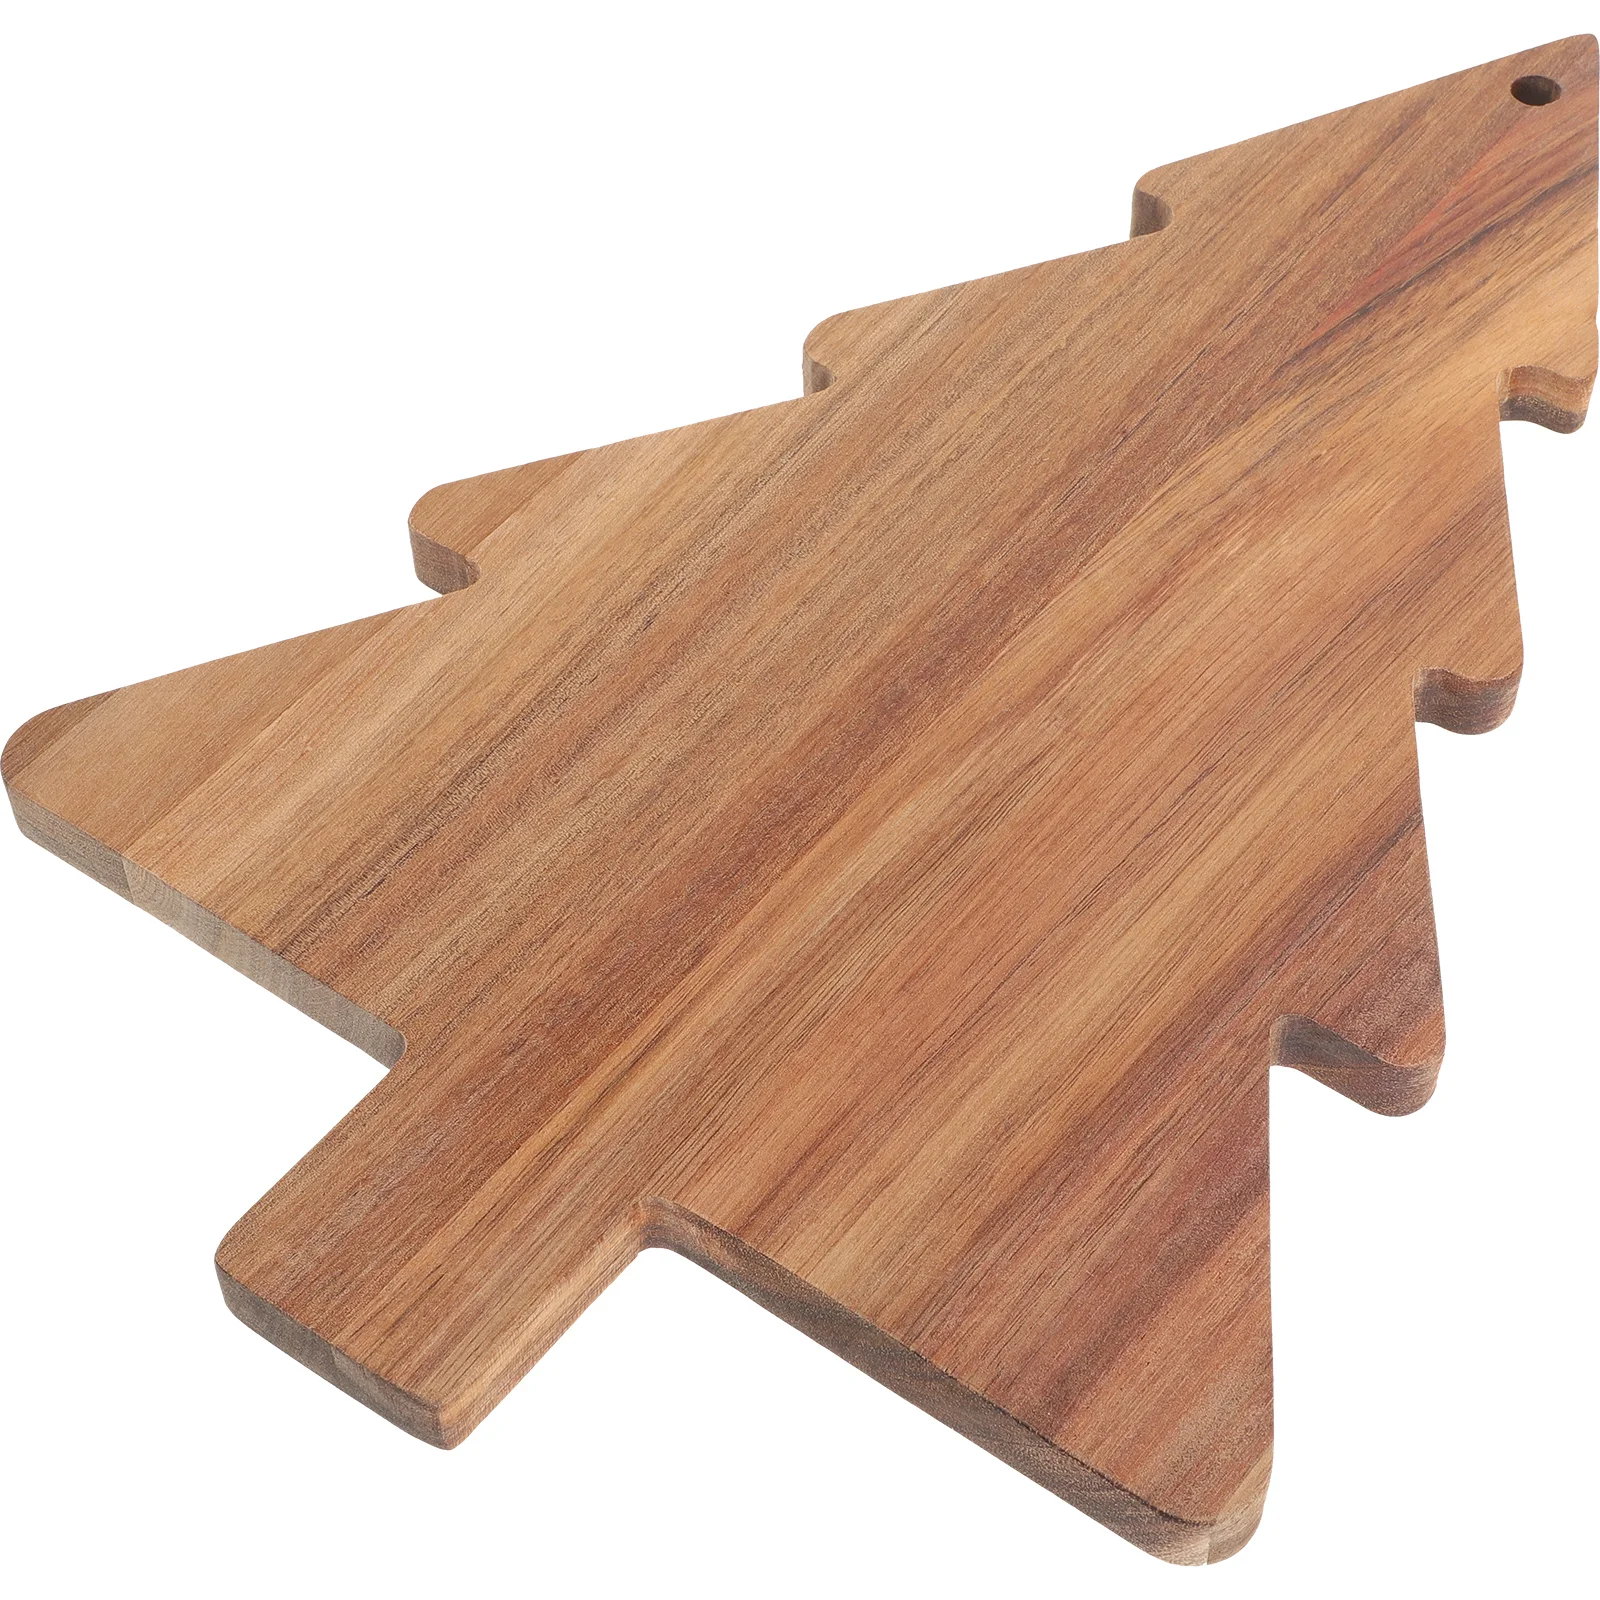 

Board Kitchen Pizza Storage Fruit Cutting Charcuterie Boards Wooden Tray Christmas Tree Shaped Decore